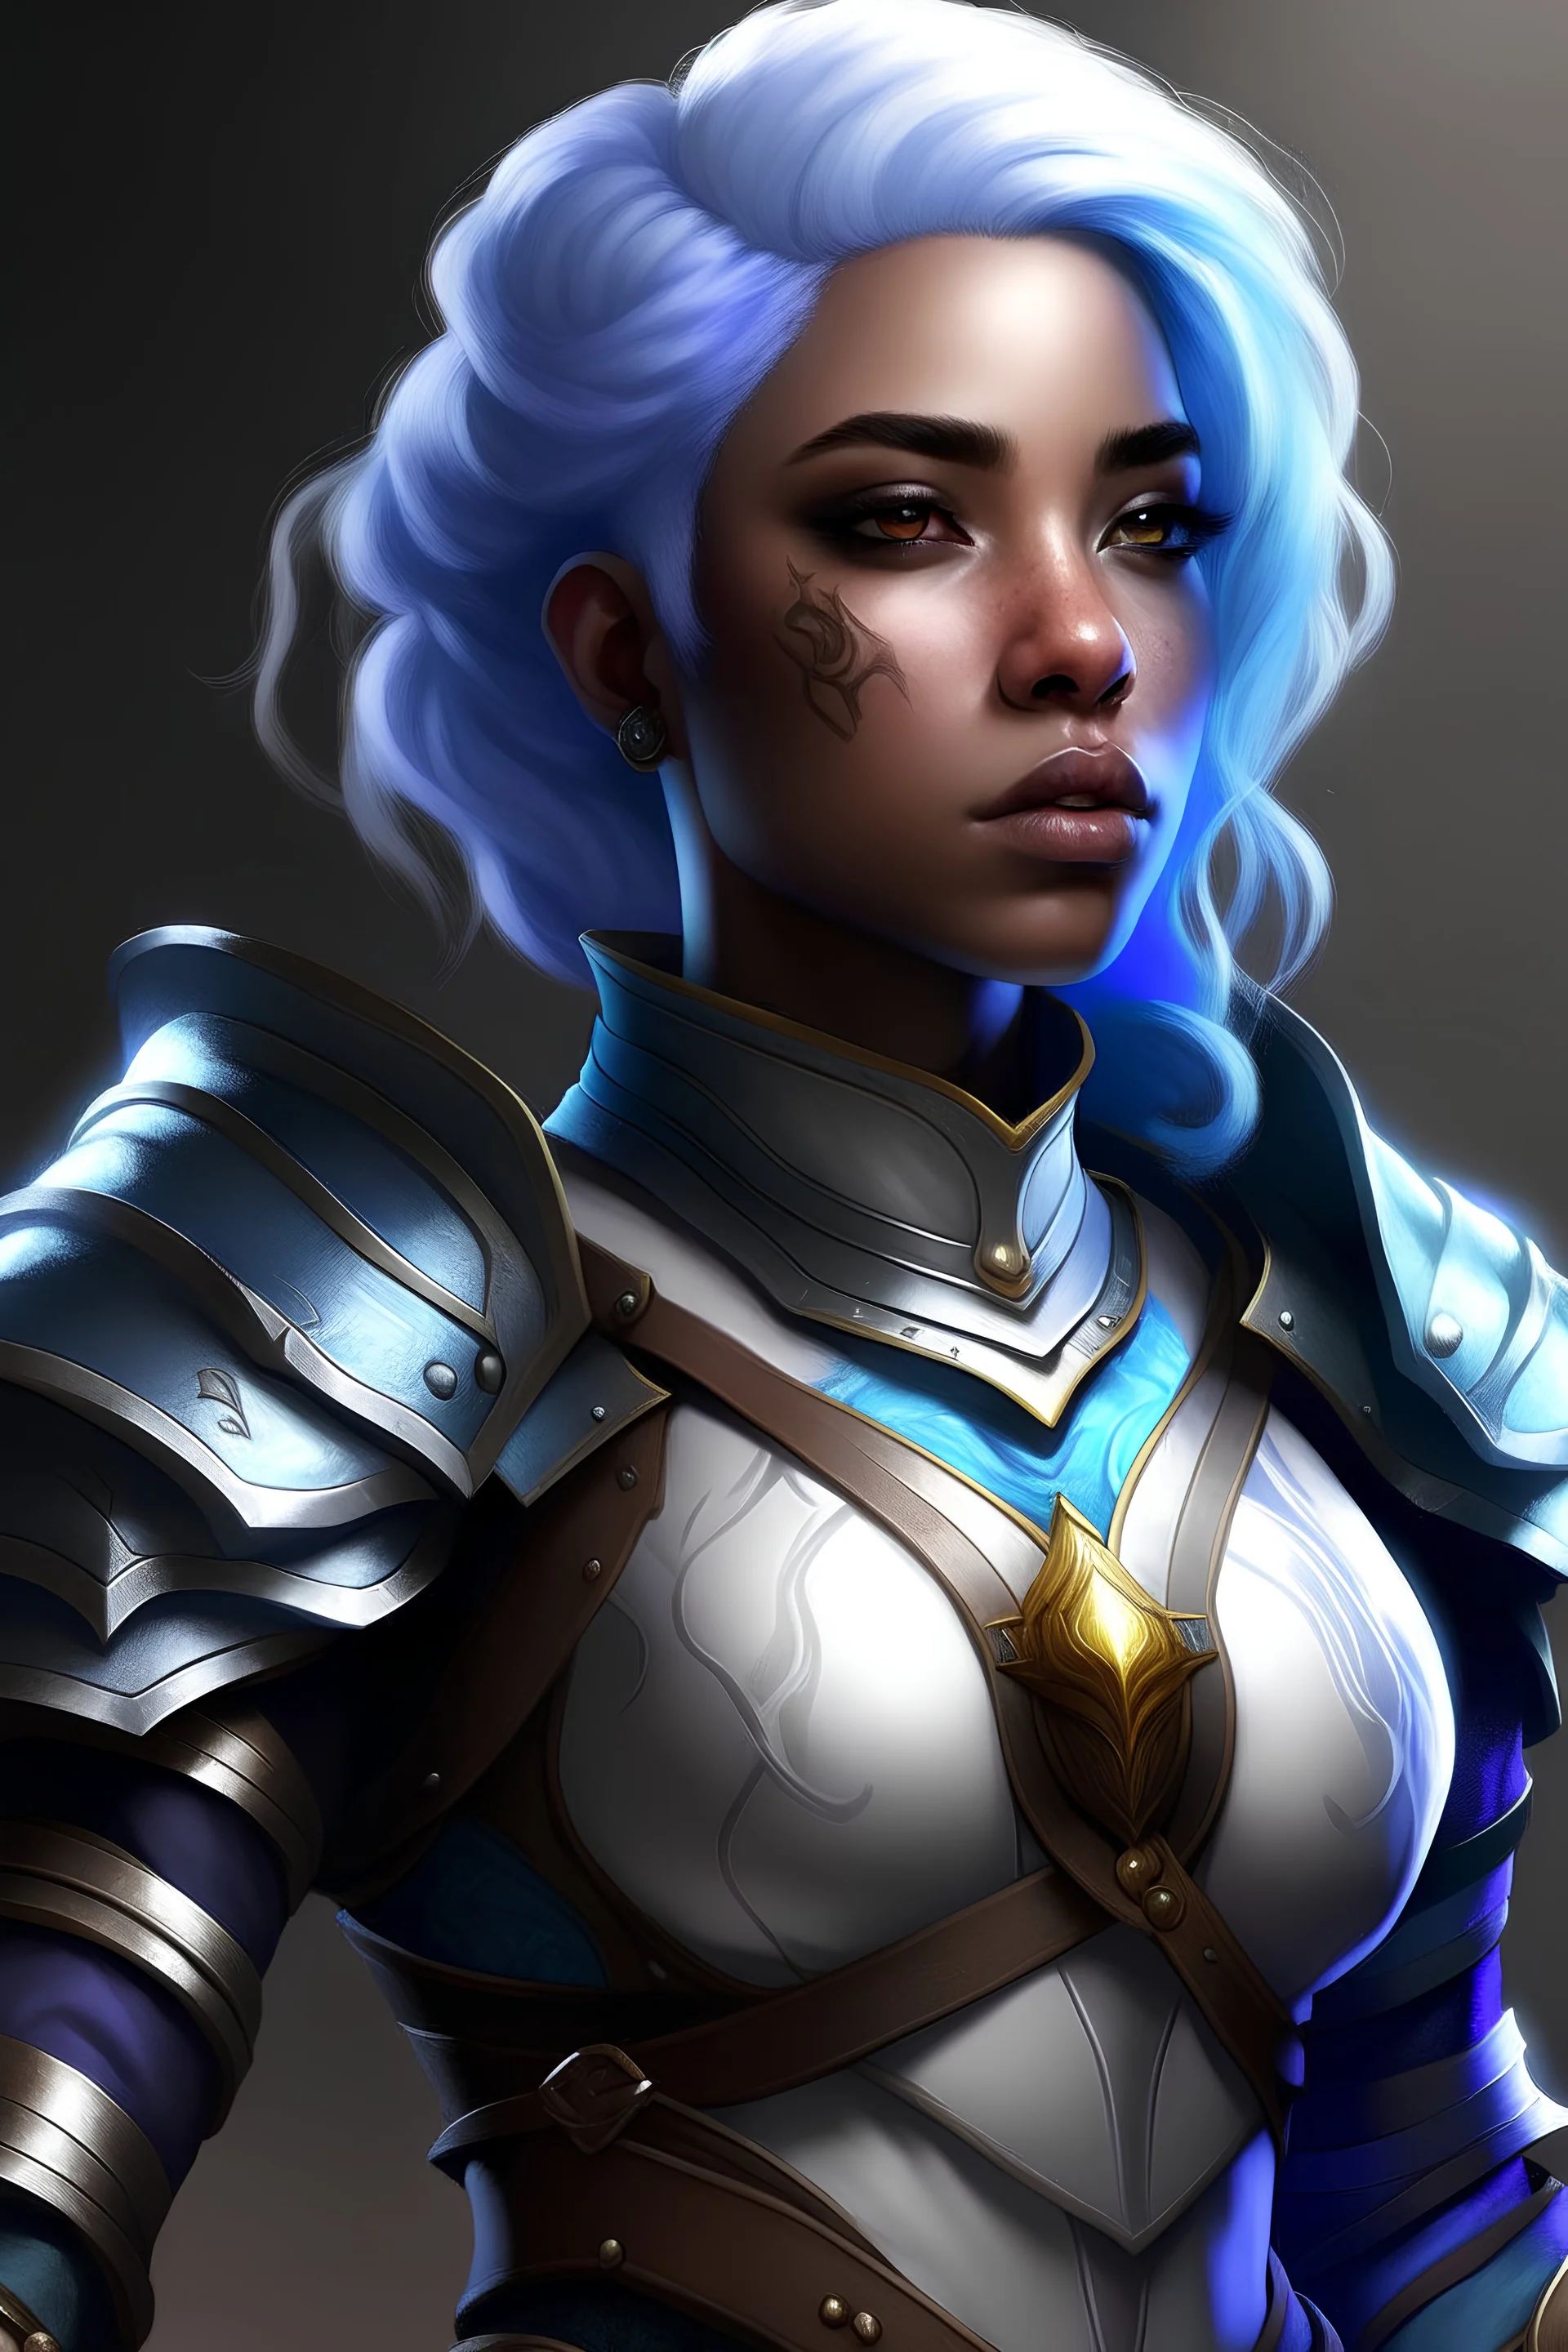 female air genasi from dungeons and dragons, white blue hair, wind like hair, woman of color, chain mail and hot leather clothing, cleric, realistic, digital art, high resolution, strong lighting, blue and purple coloring